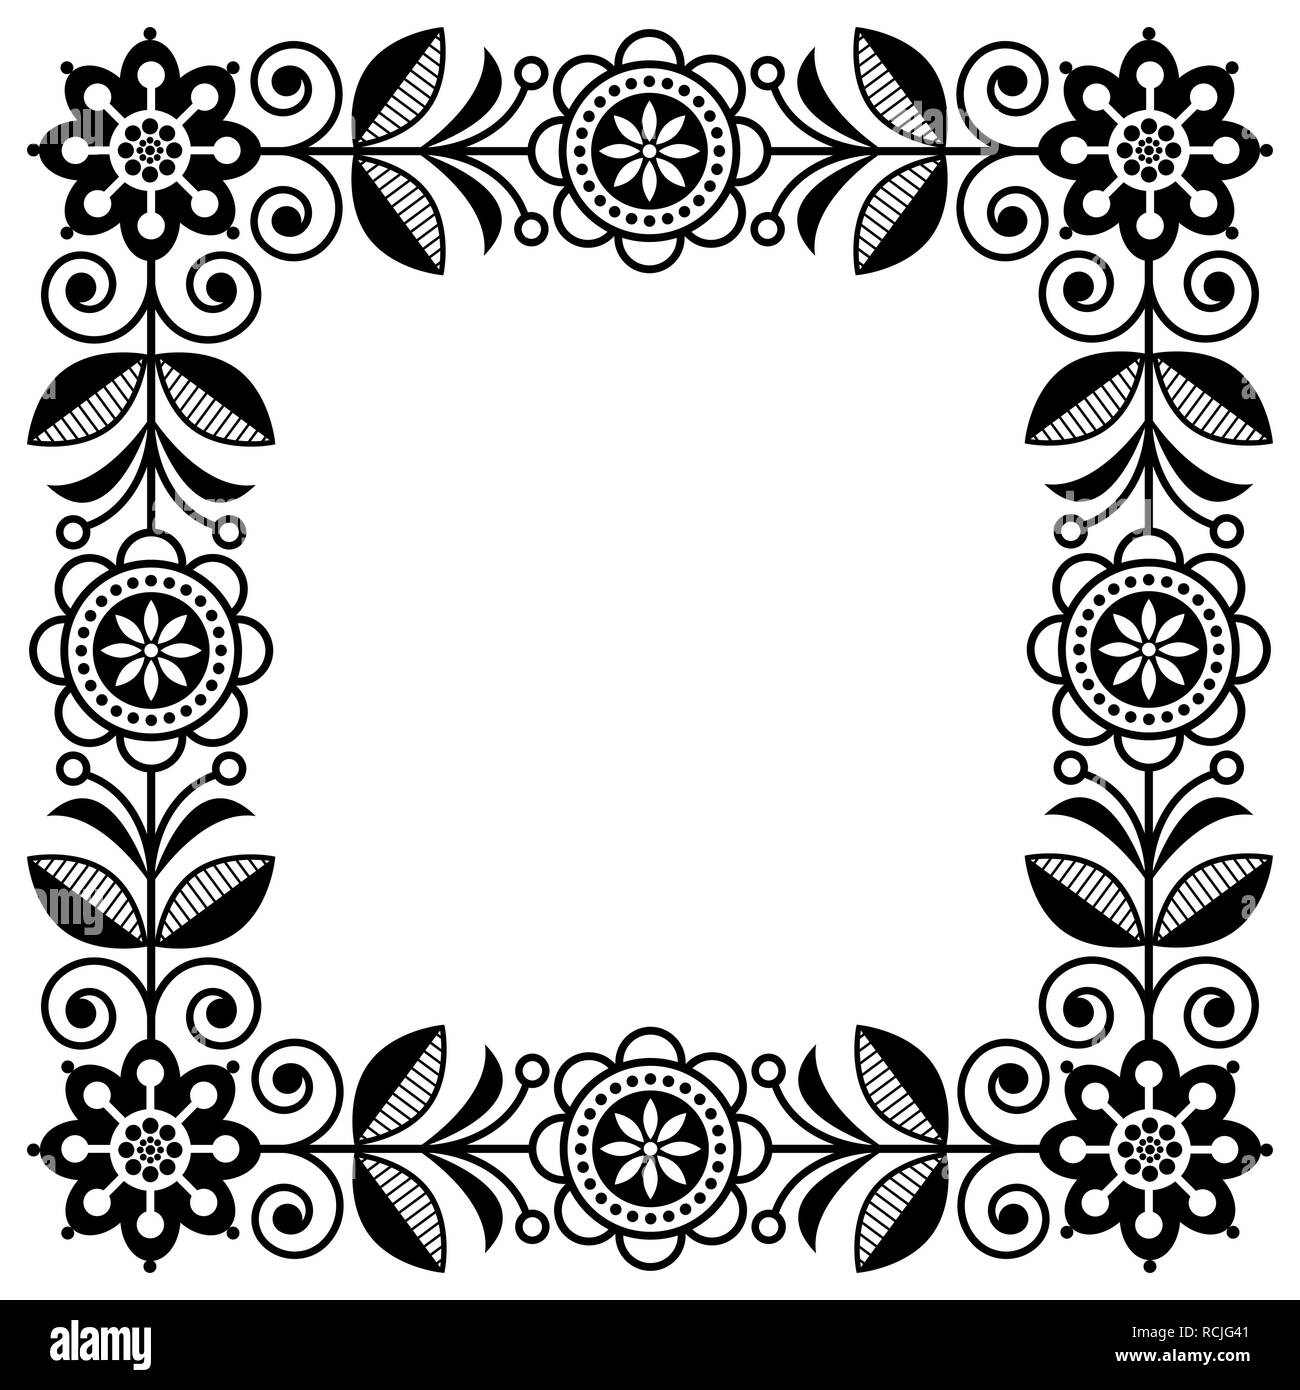 Antique Paper With Floral Border 19th Century High-Res Vector